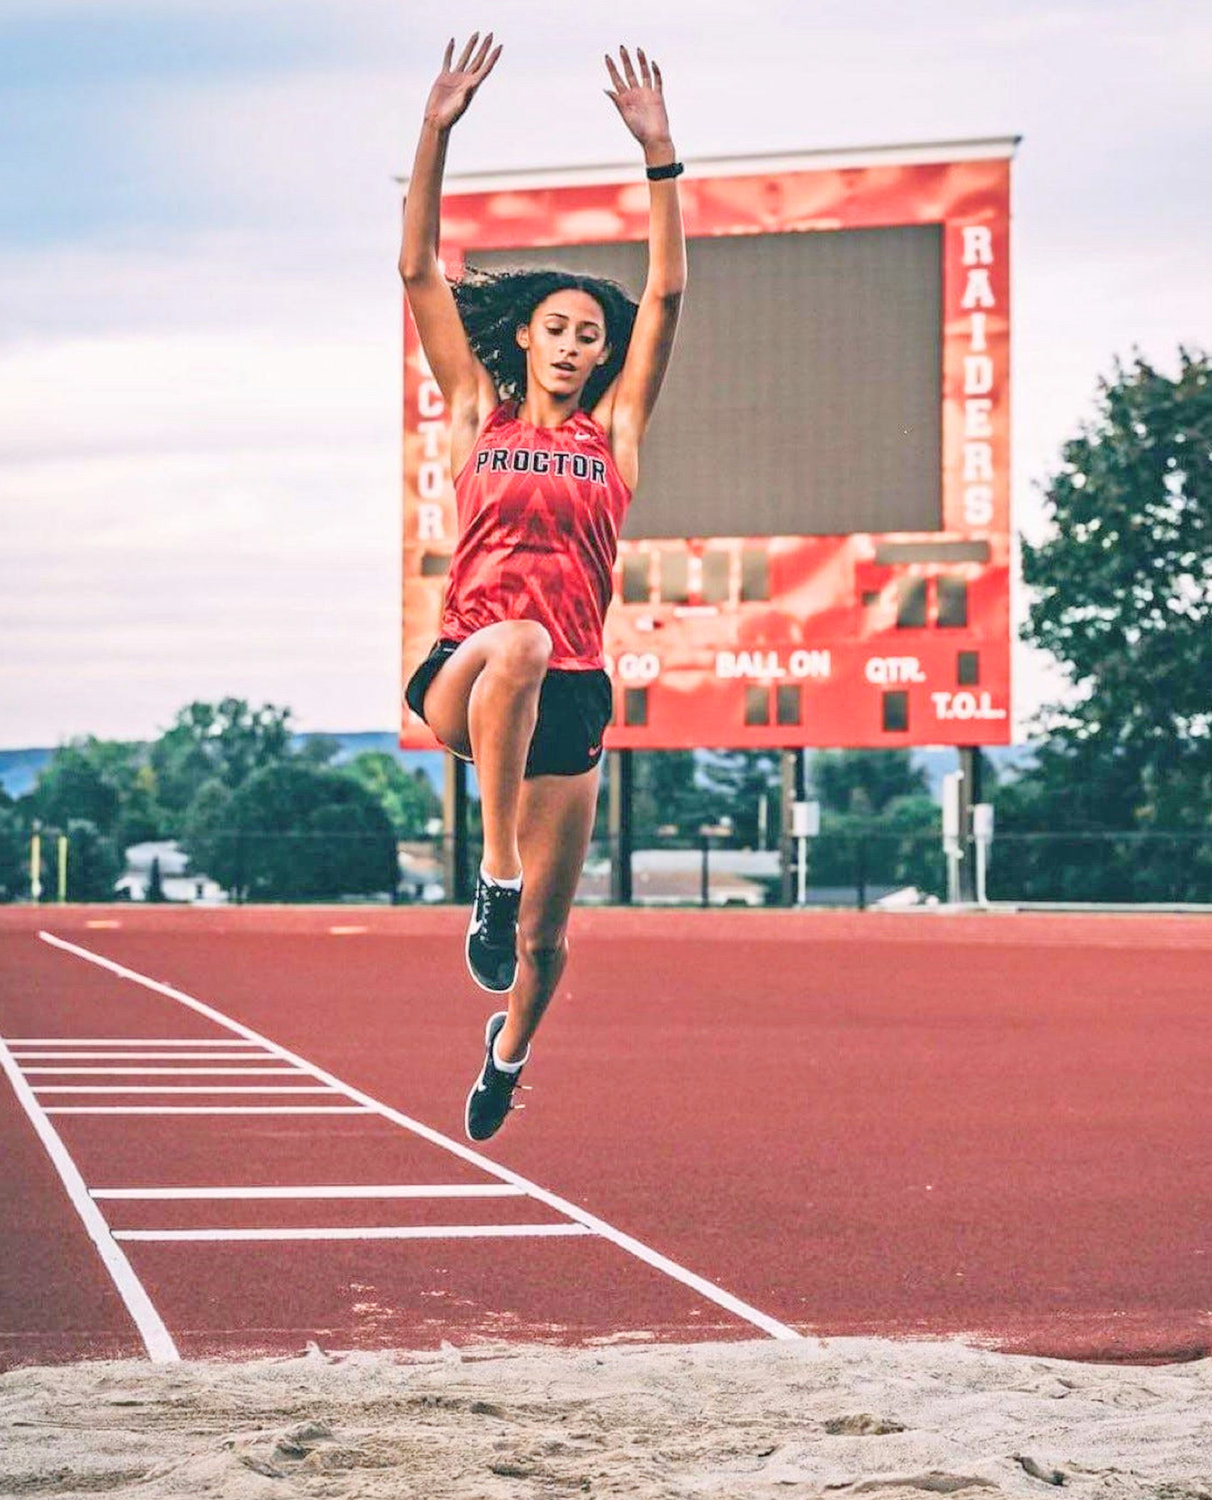 Tamiah Washington of Utica won the triple jump for her age group at the AAU Junior Olympic Games at North Carolina A&amp;T University in Greensboro.